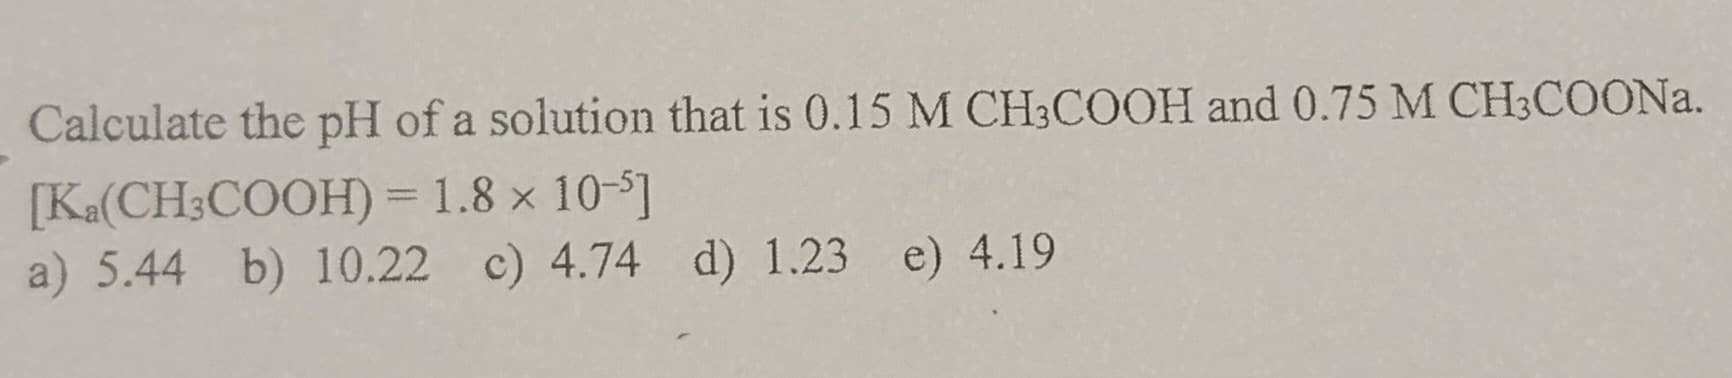 Calculate the pH of a solution that is 0.15 M CH3COOH and 0.75 M CH3COONa.
[Ka(CH3COOH) = 1.8 x 10-5]
a) 5.44 b) 10.22 c) 4.74 d) 1.23 e) 4.19